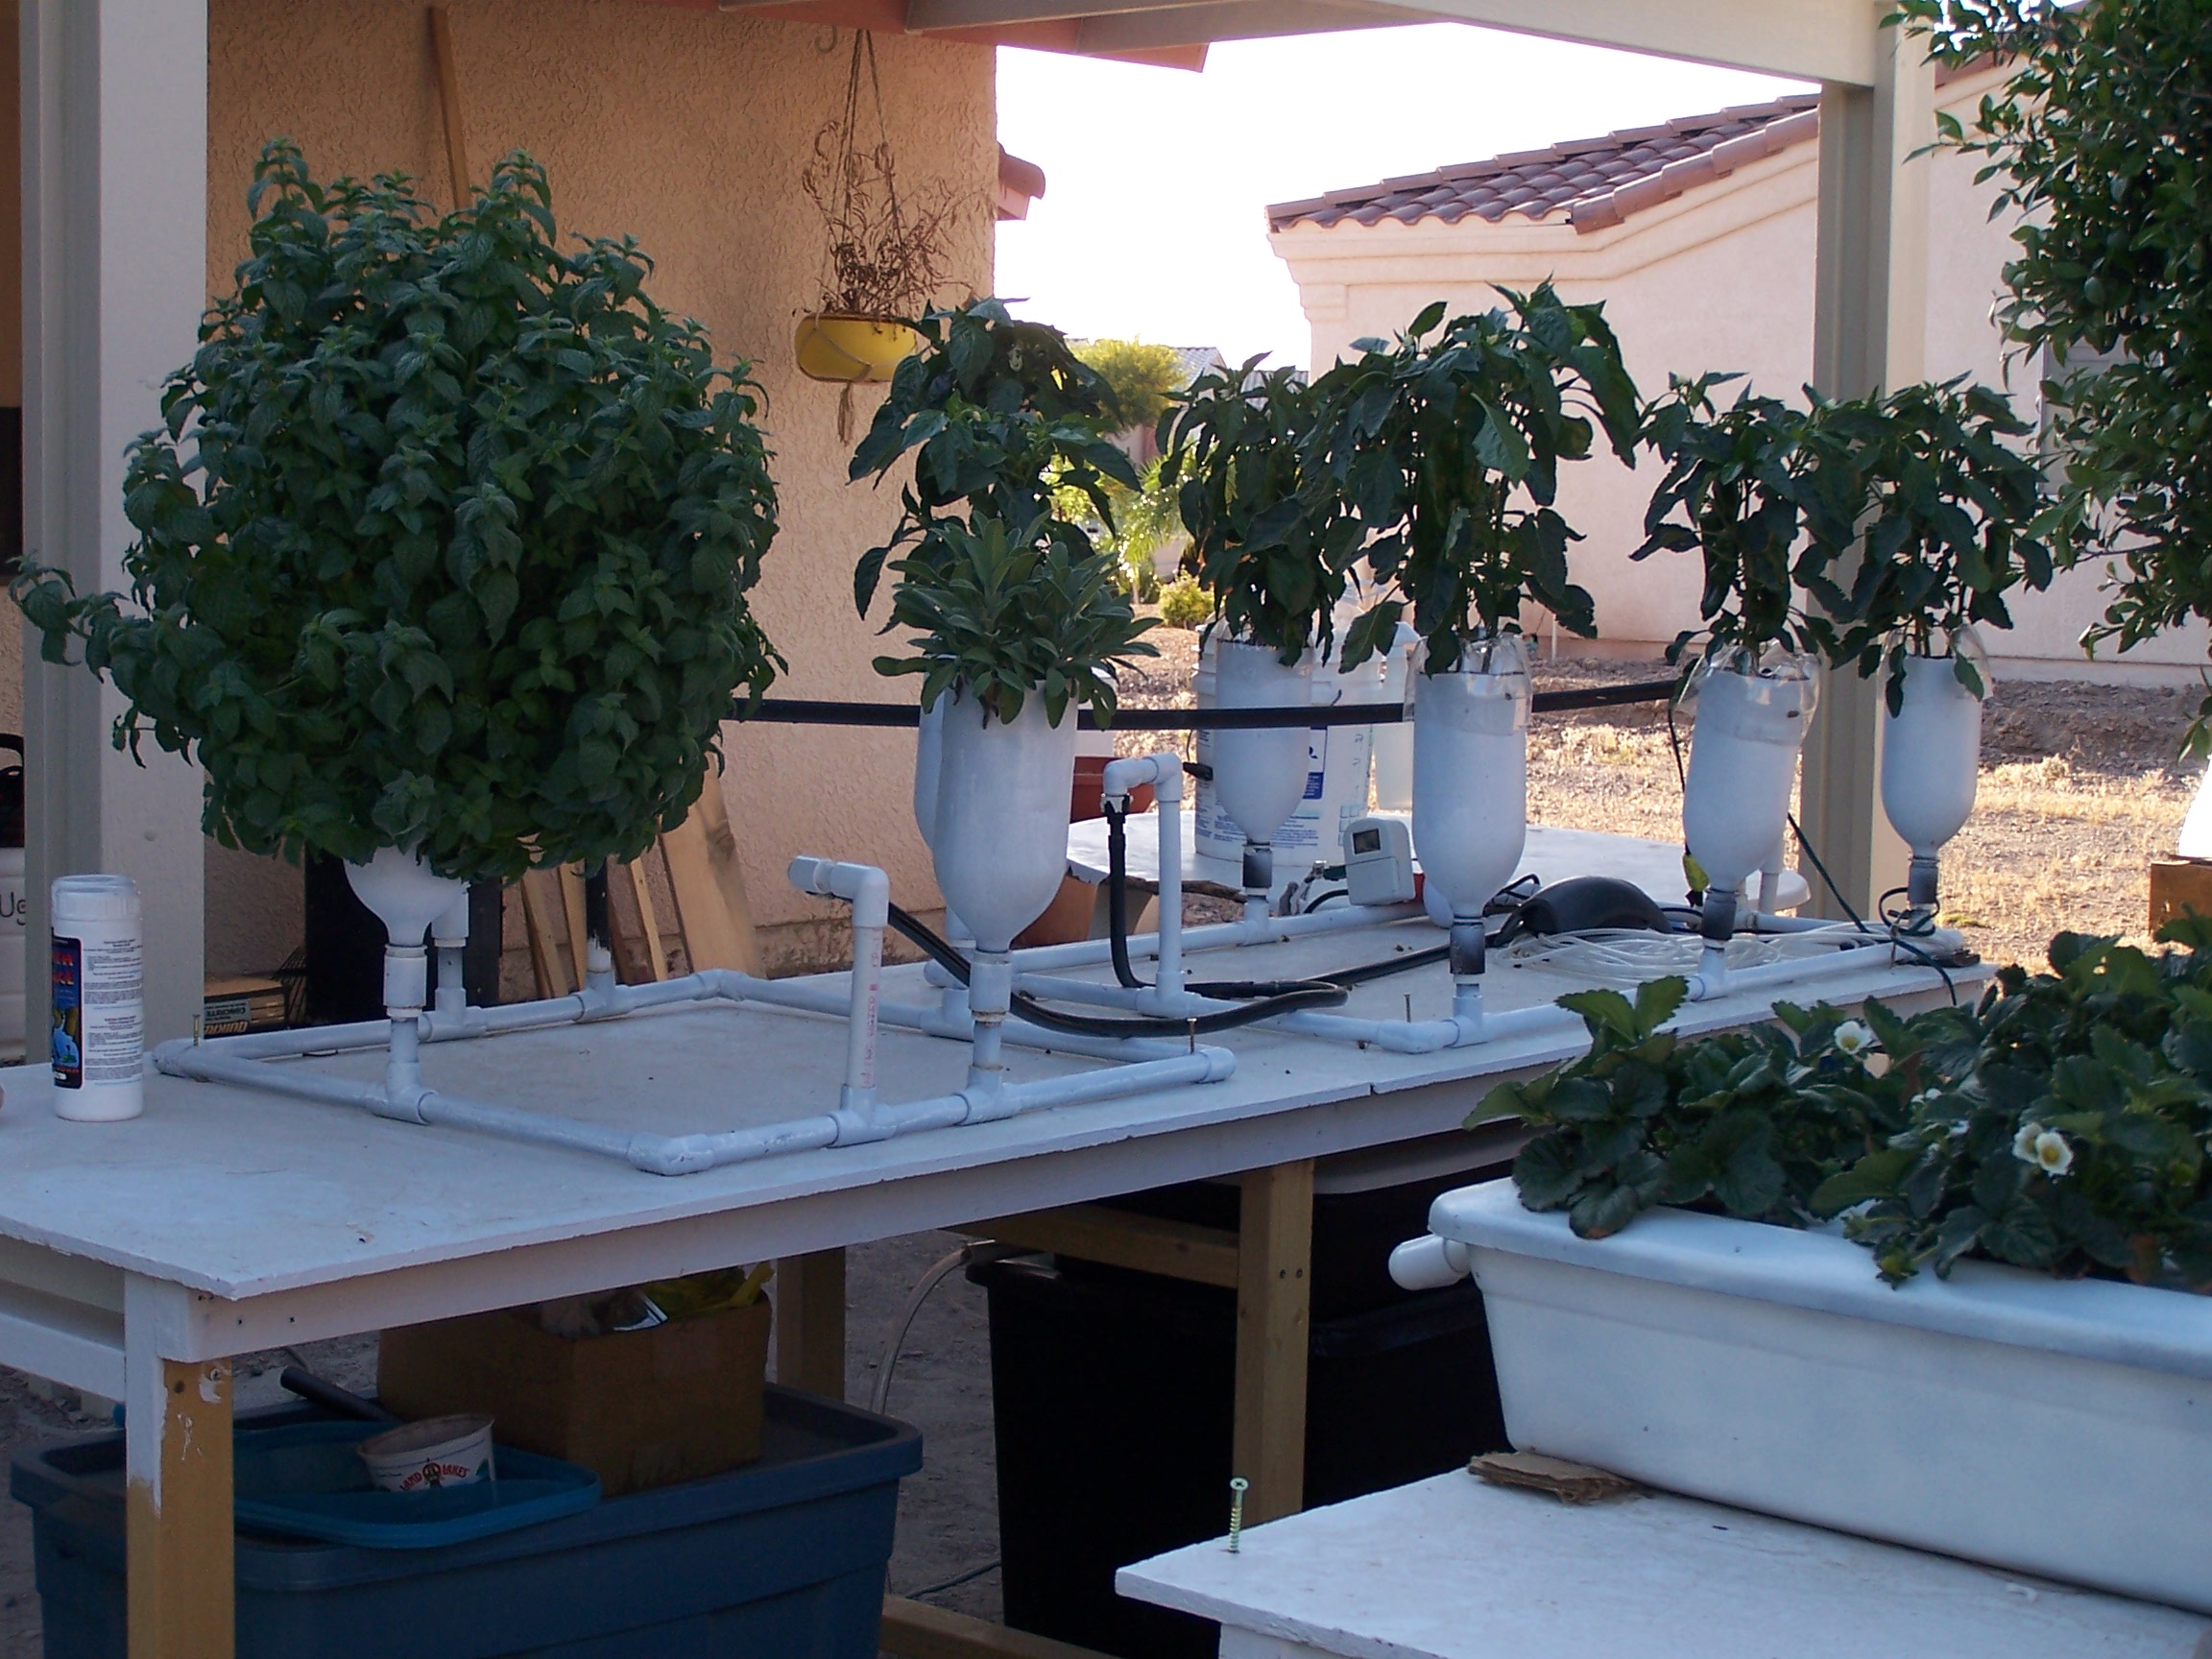 Hydroponic Growing Systems Diagram Hydroponic System Setup ...